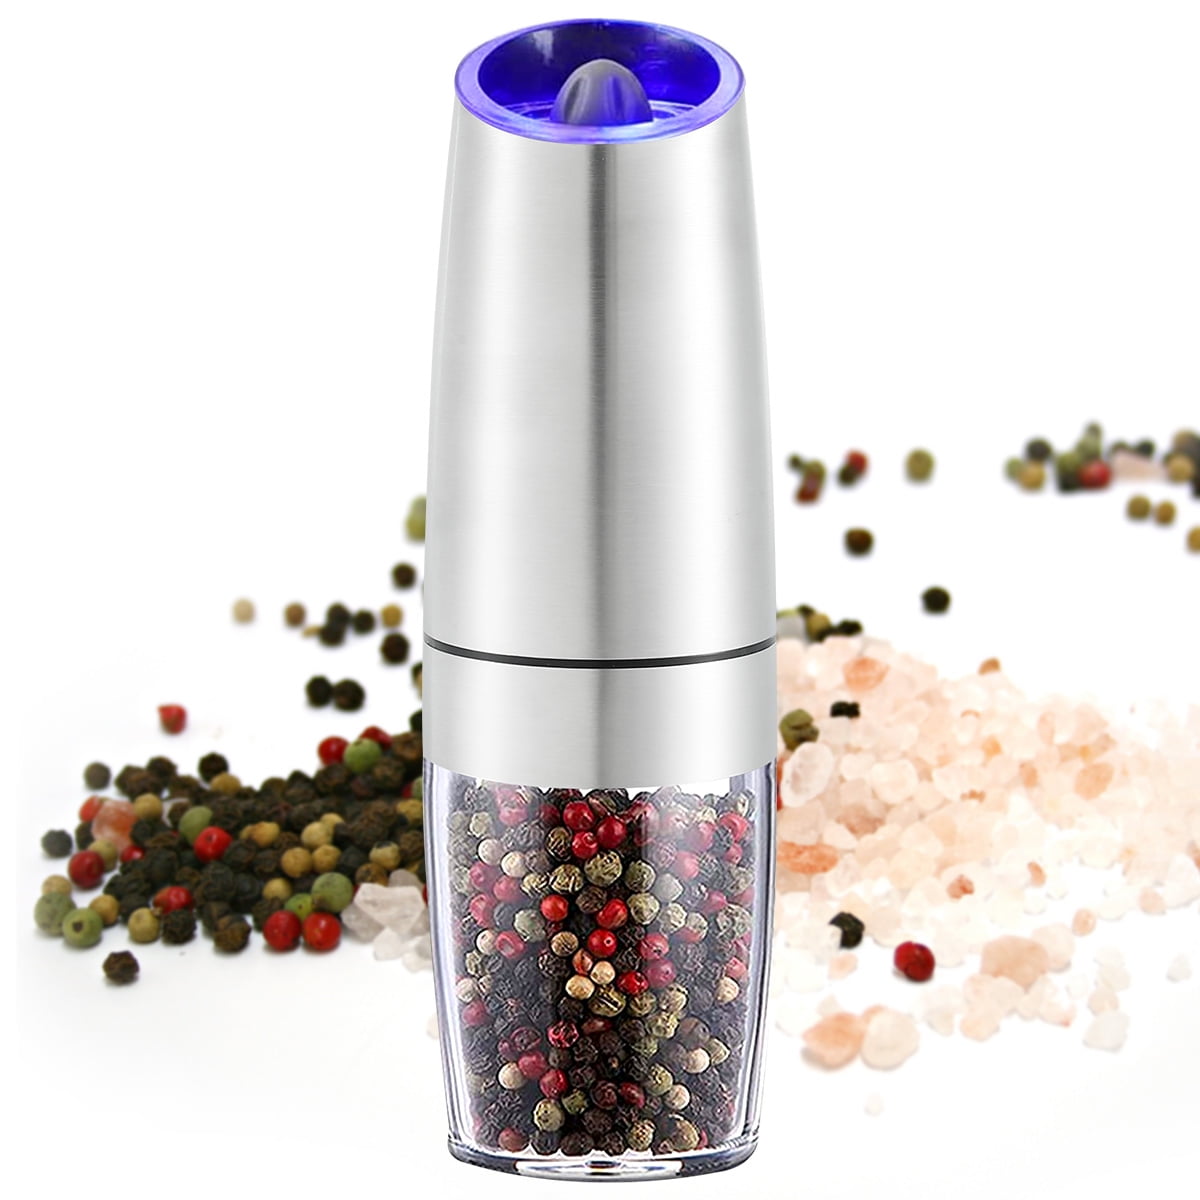 XinXu Gravity Electric Salt Shaker - Automatic Pepper Grinder - Pepper or Salt Mill Grinder, Battery-Operated with Adjustable Coarseness, Premium